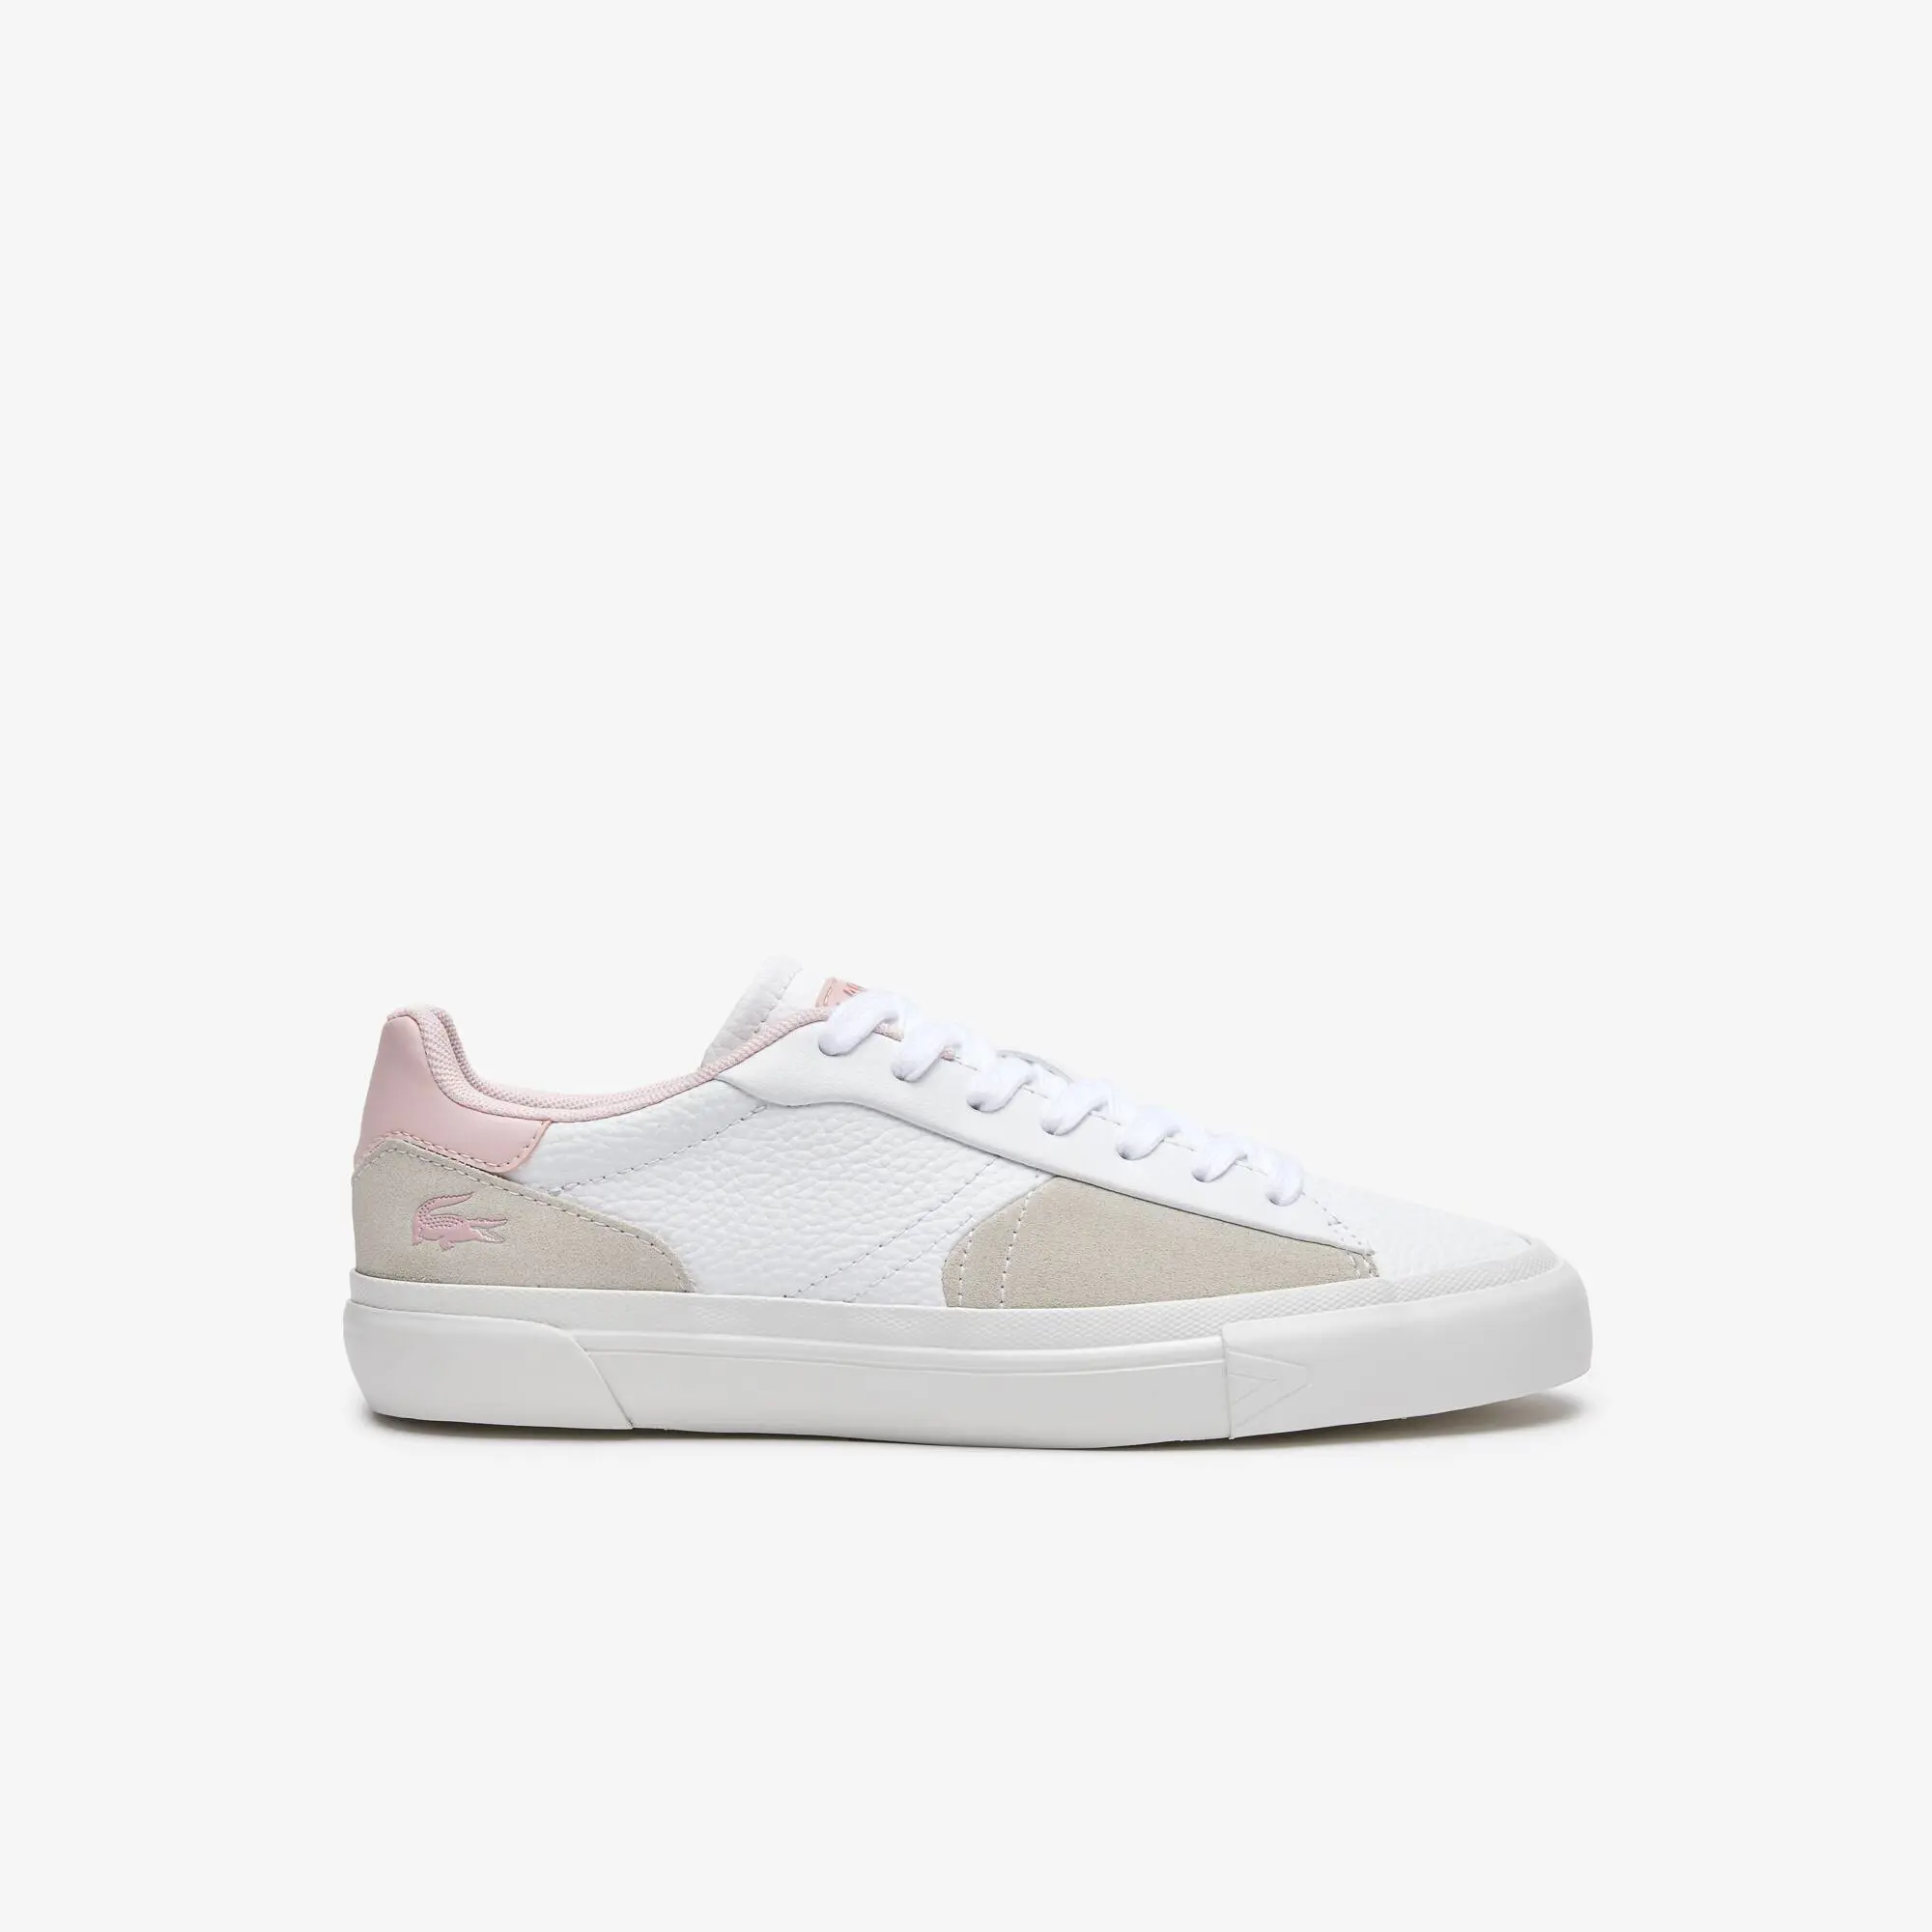 Lacoste Women's Lacoste L006 Leather Trainers. 1